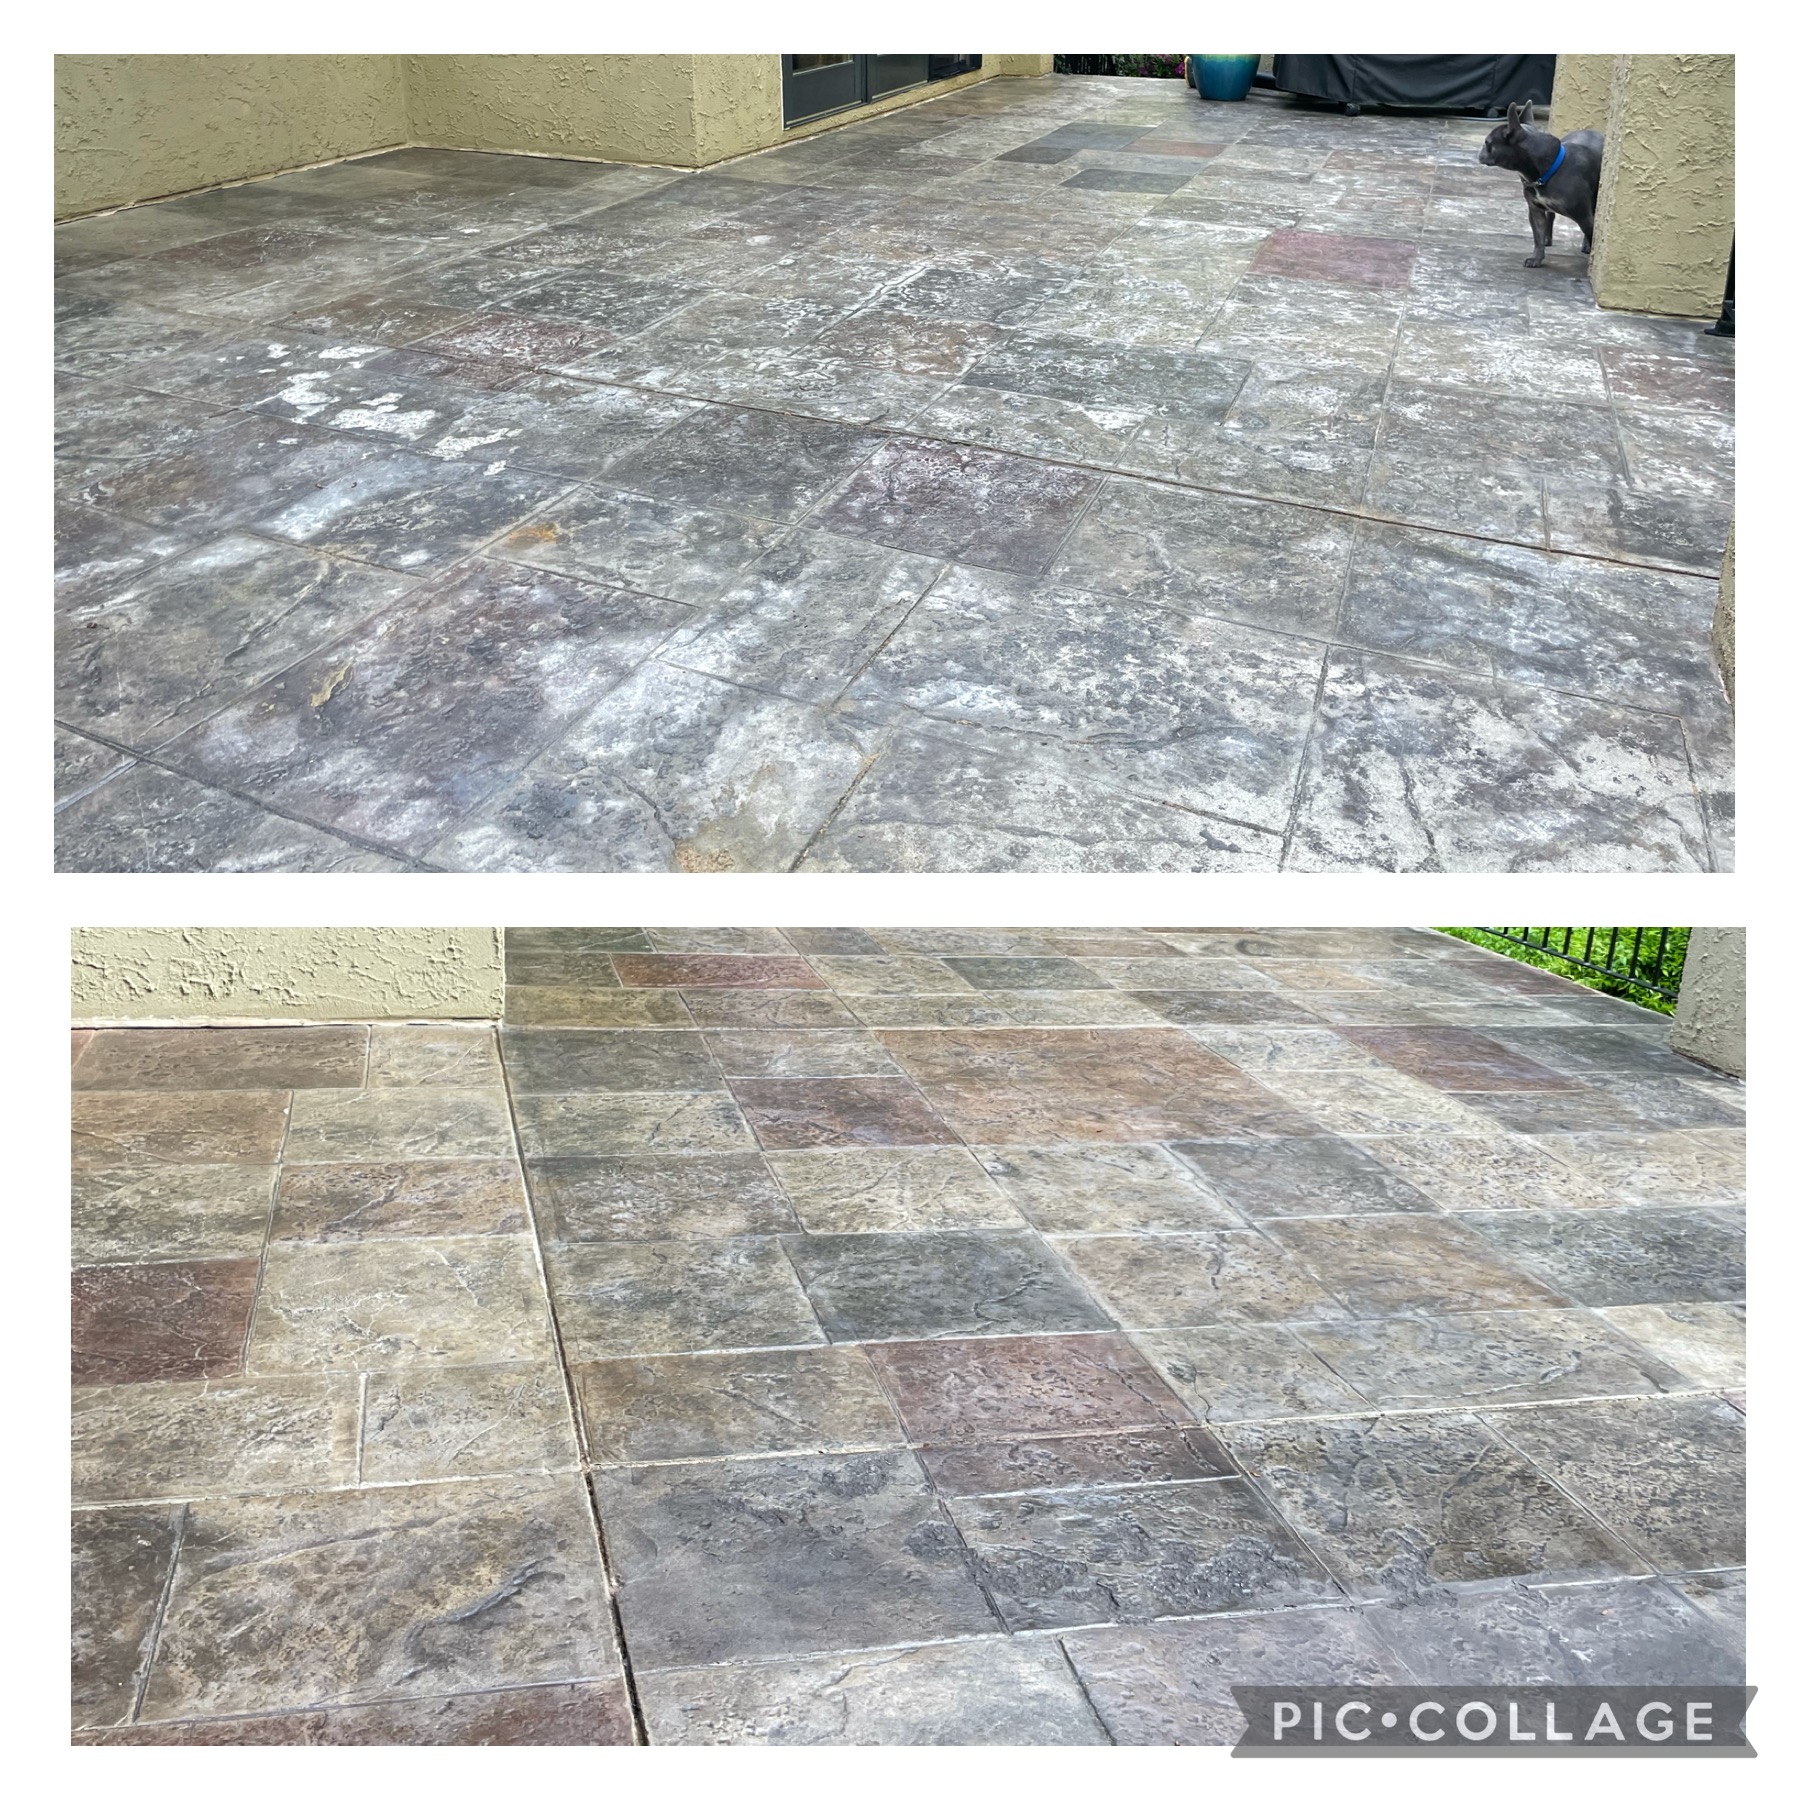 Before and after photo of stained faded concrete patio